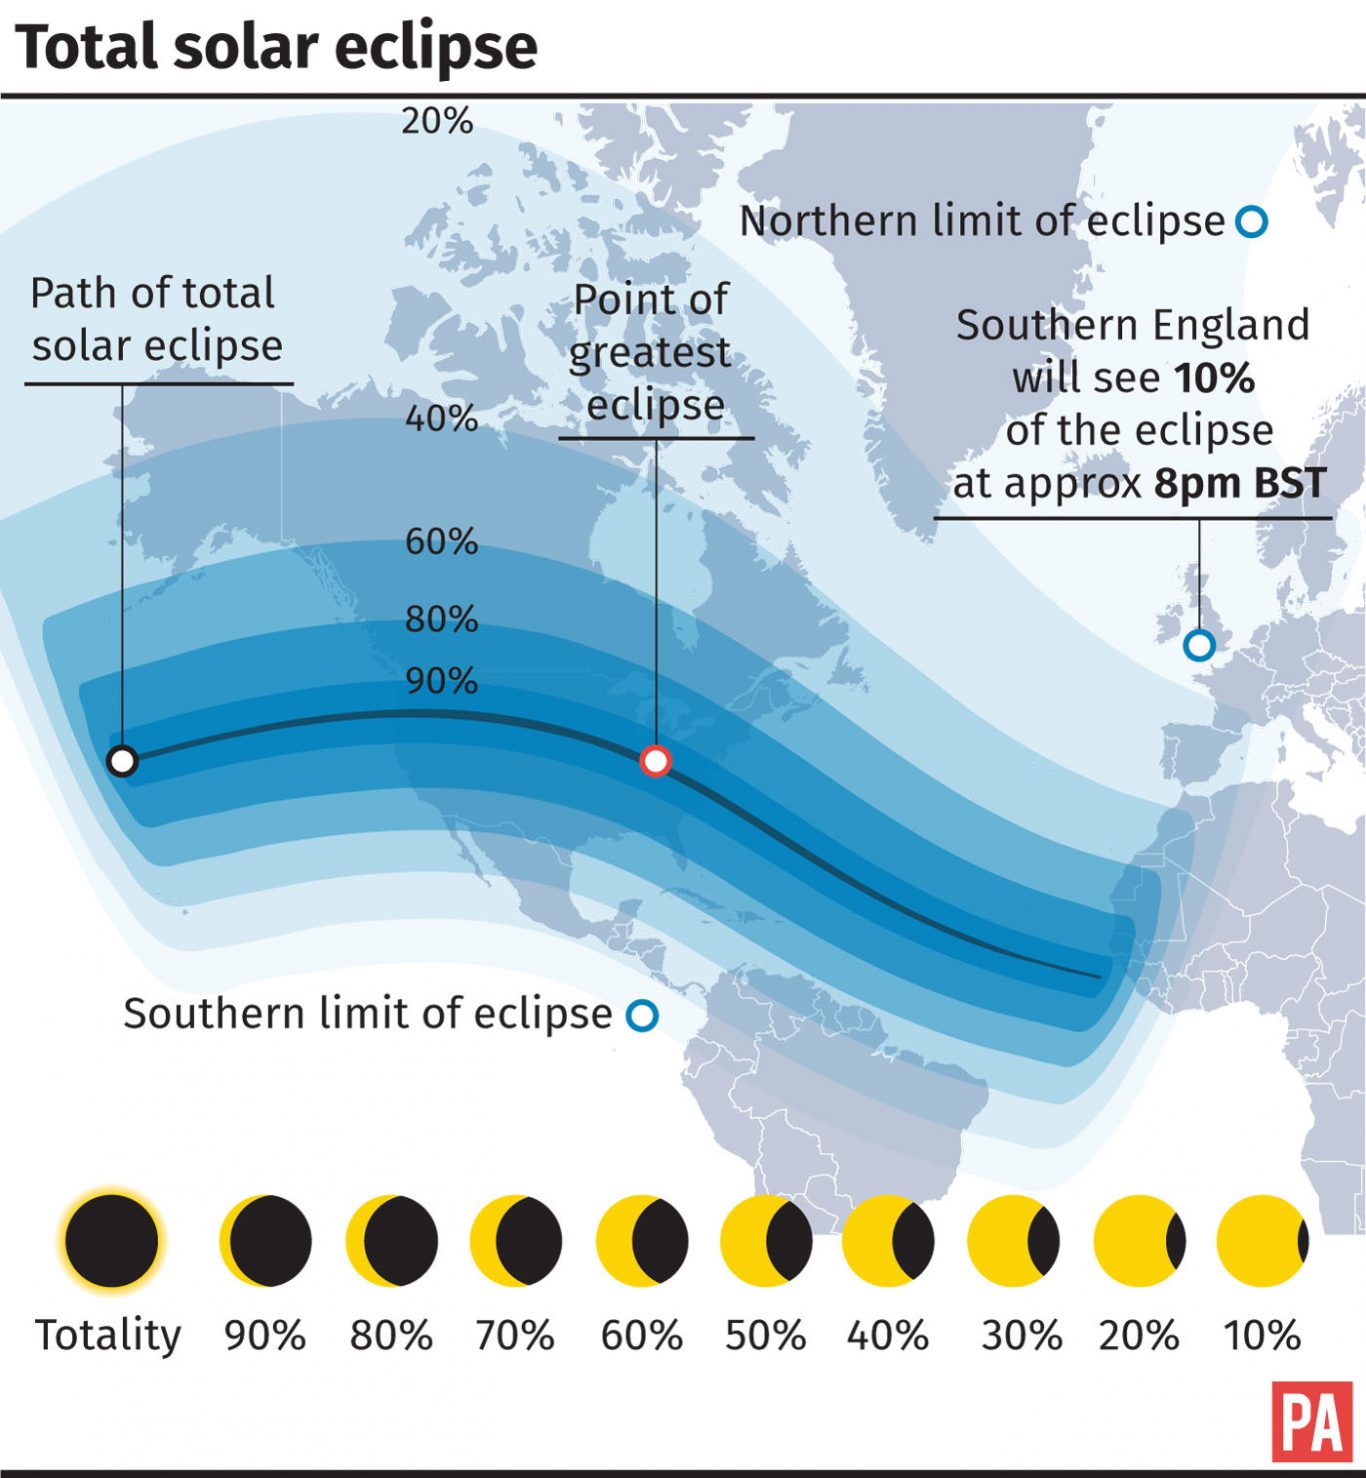 Overcast skies threaten to block views of partial solar eclipse for